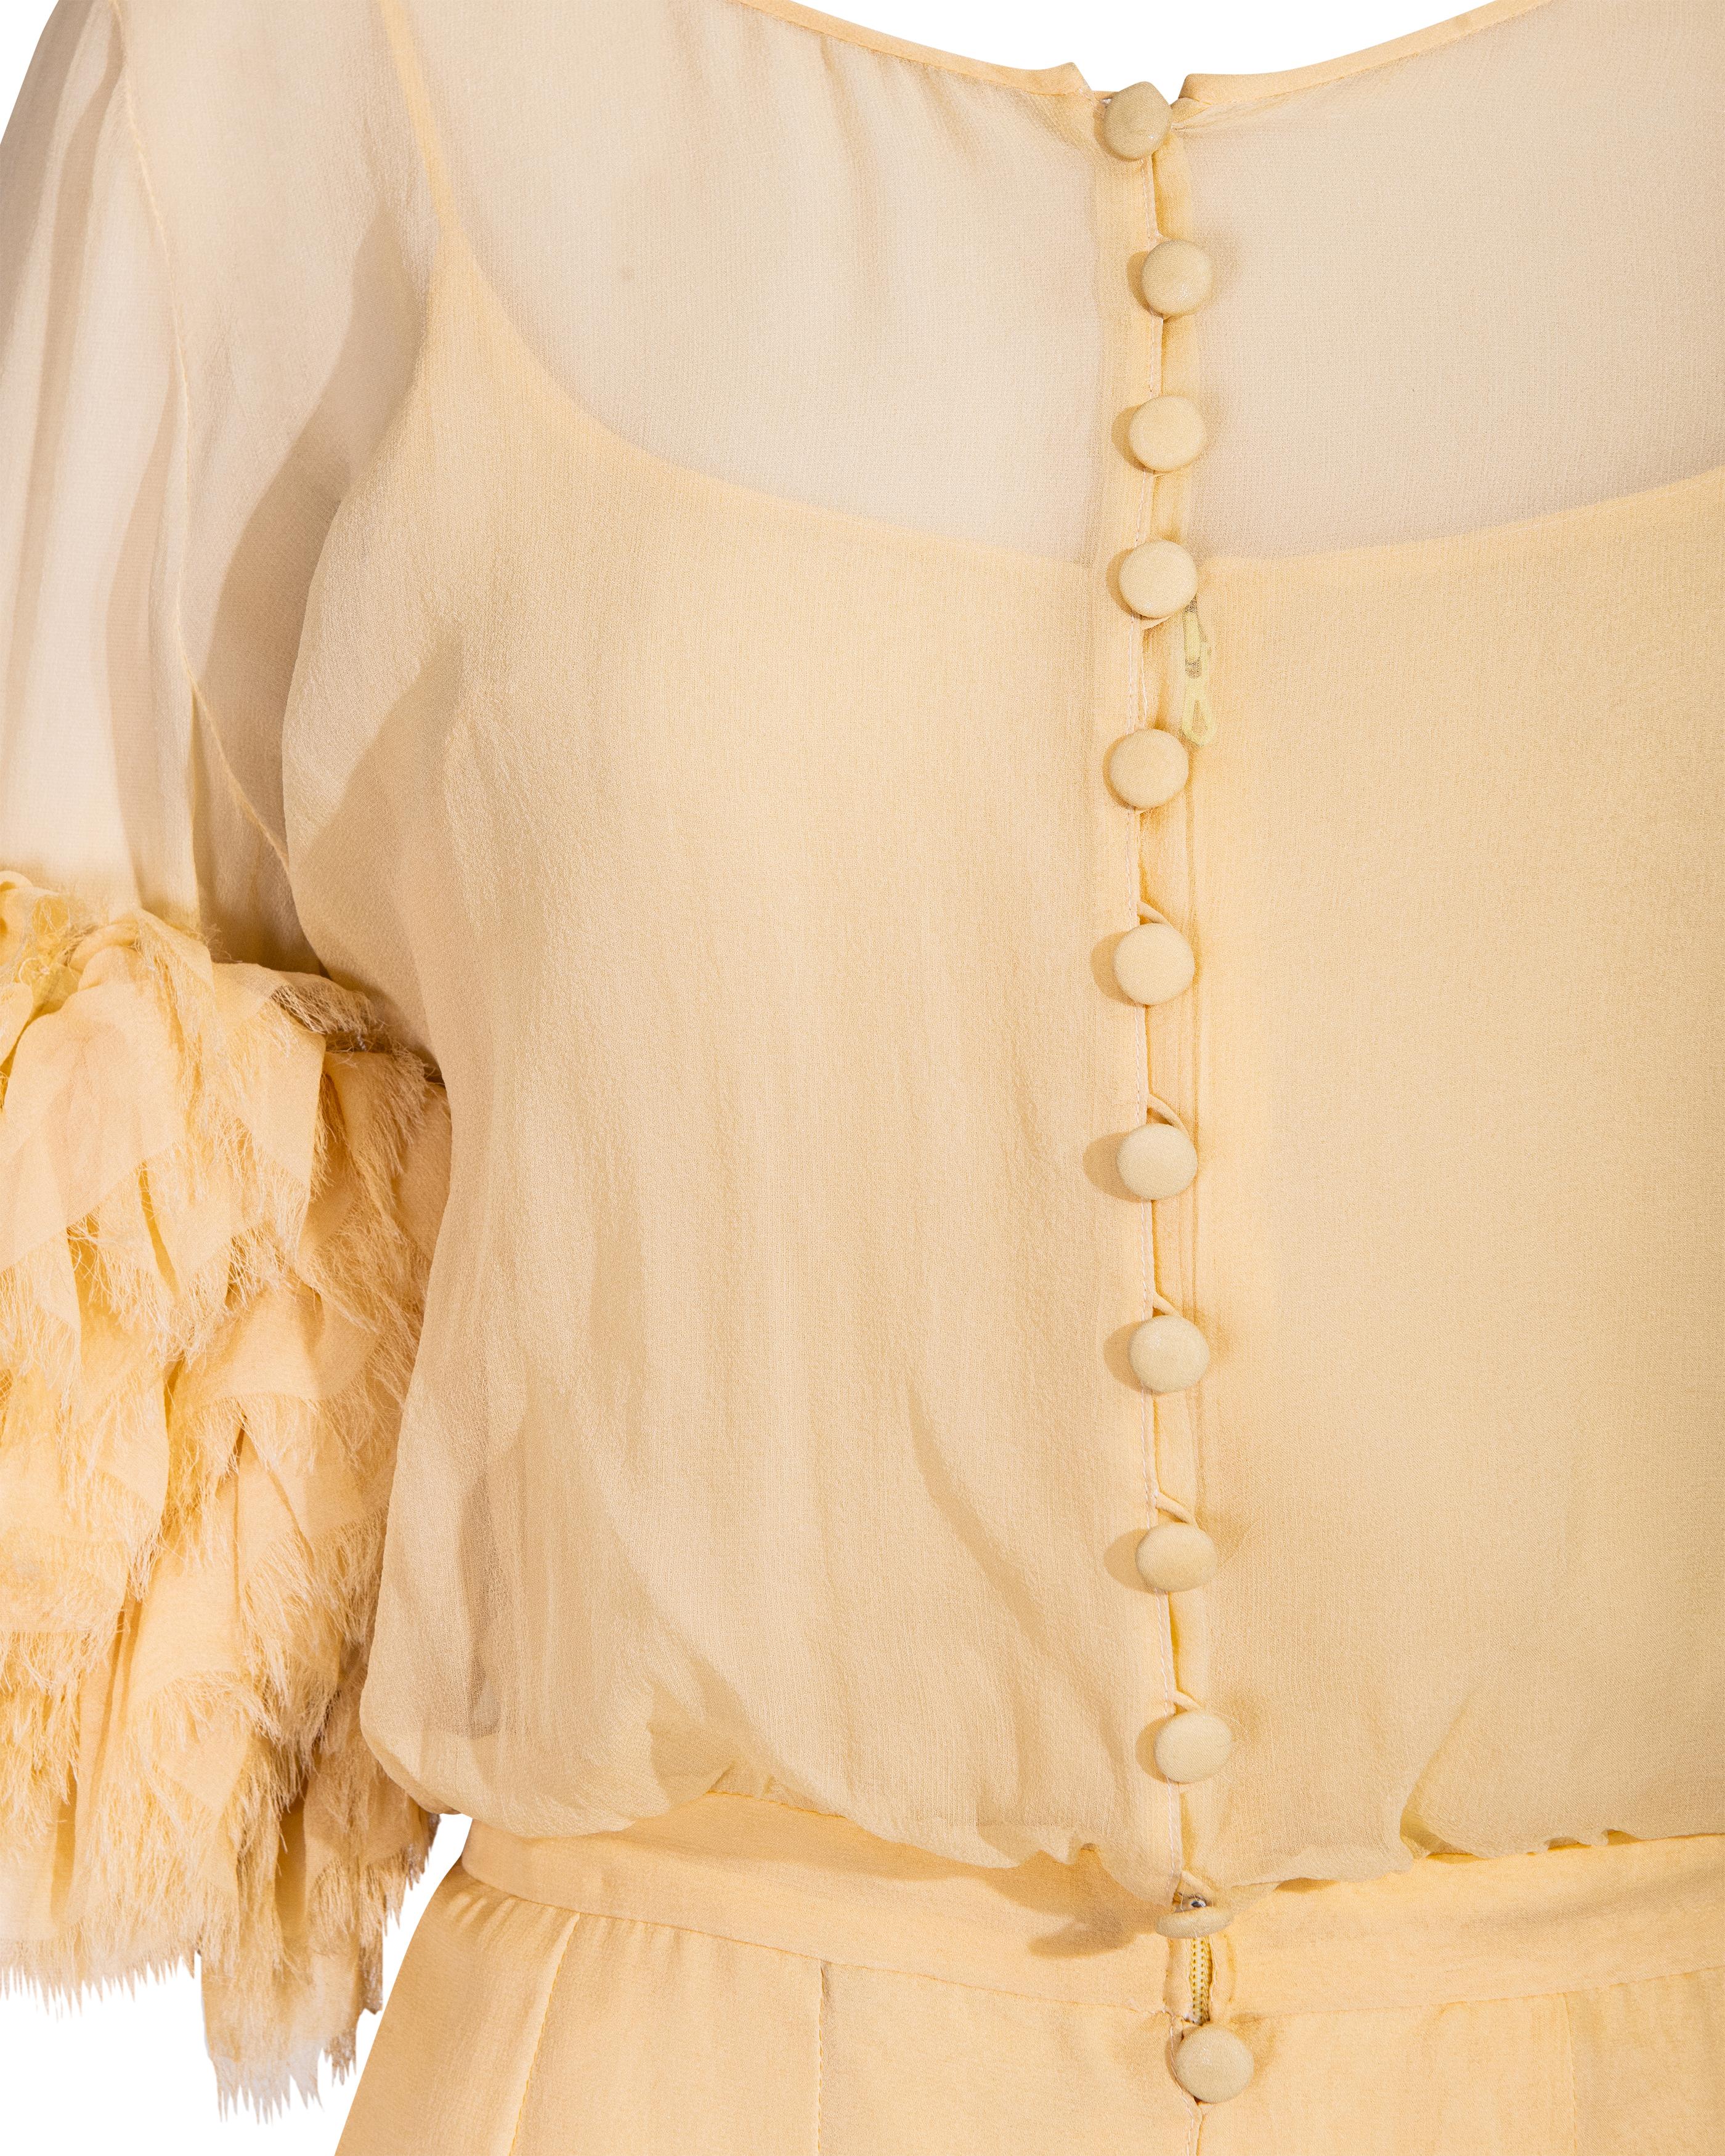 S/S 1984 Chanel by Karl Lagerfeld Butter Yellow Silk Chiffon Gown 5